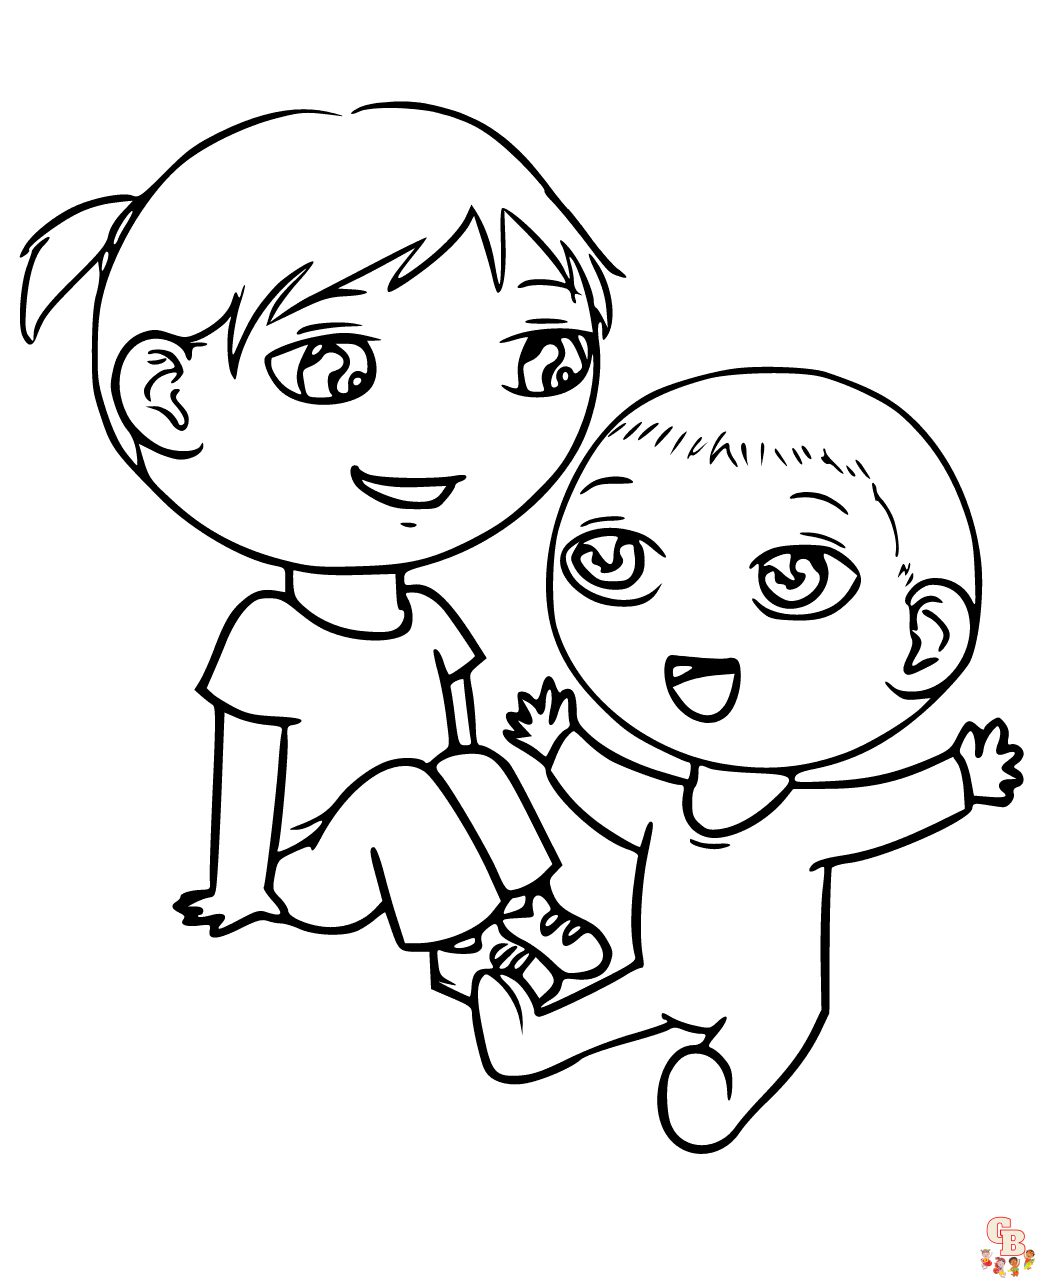 20+ Coloring Pages For Sisters